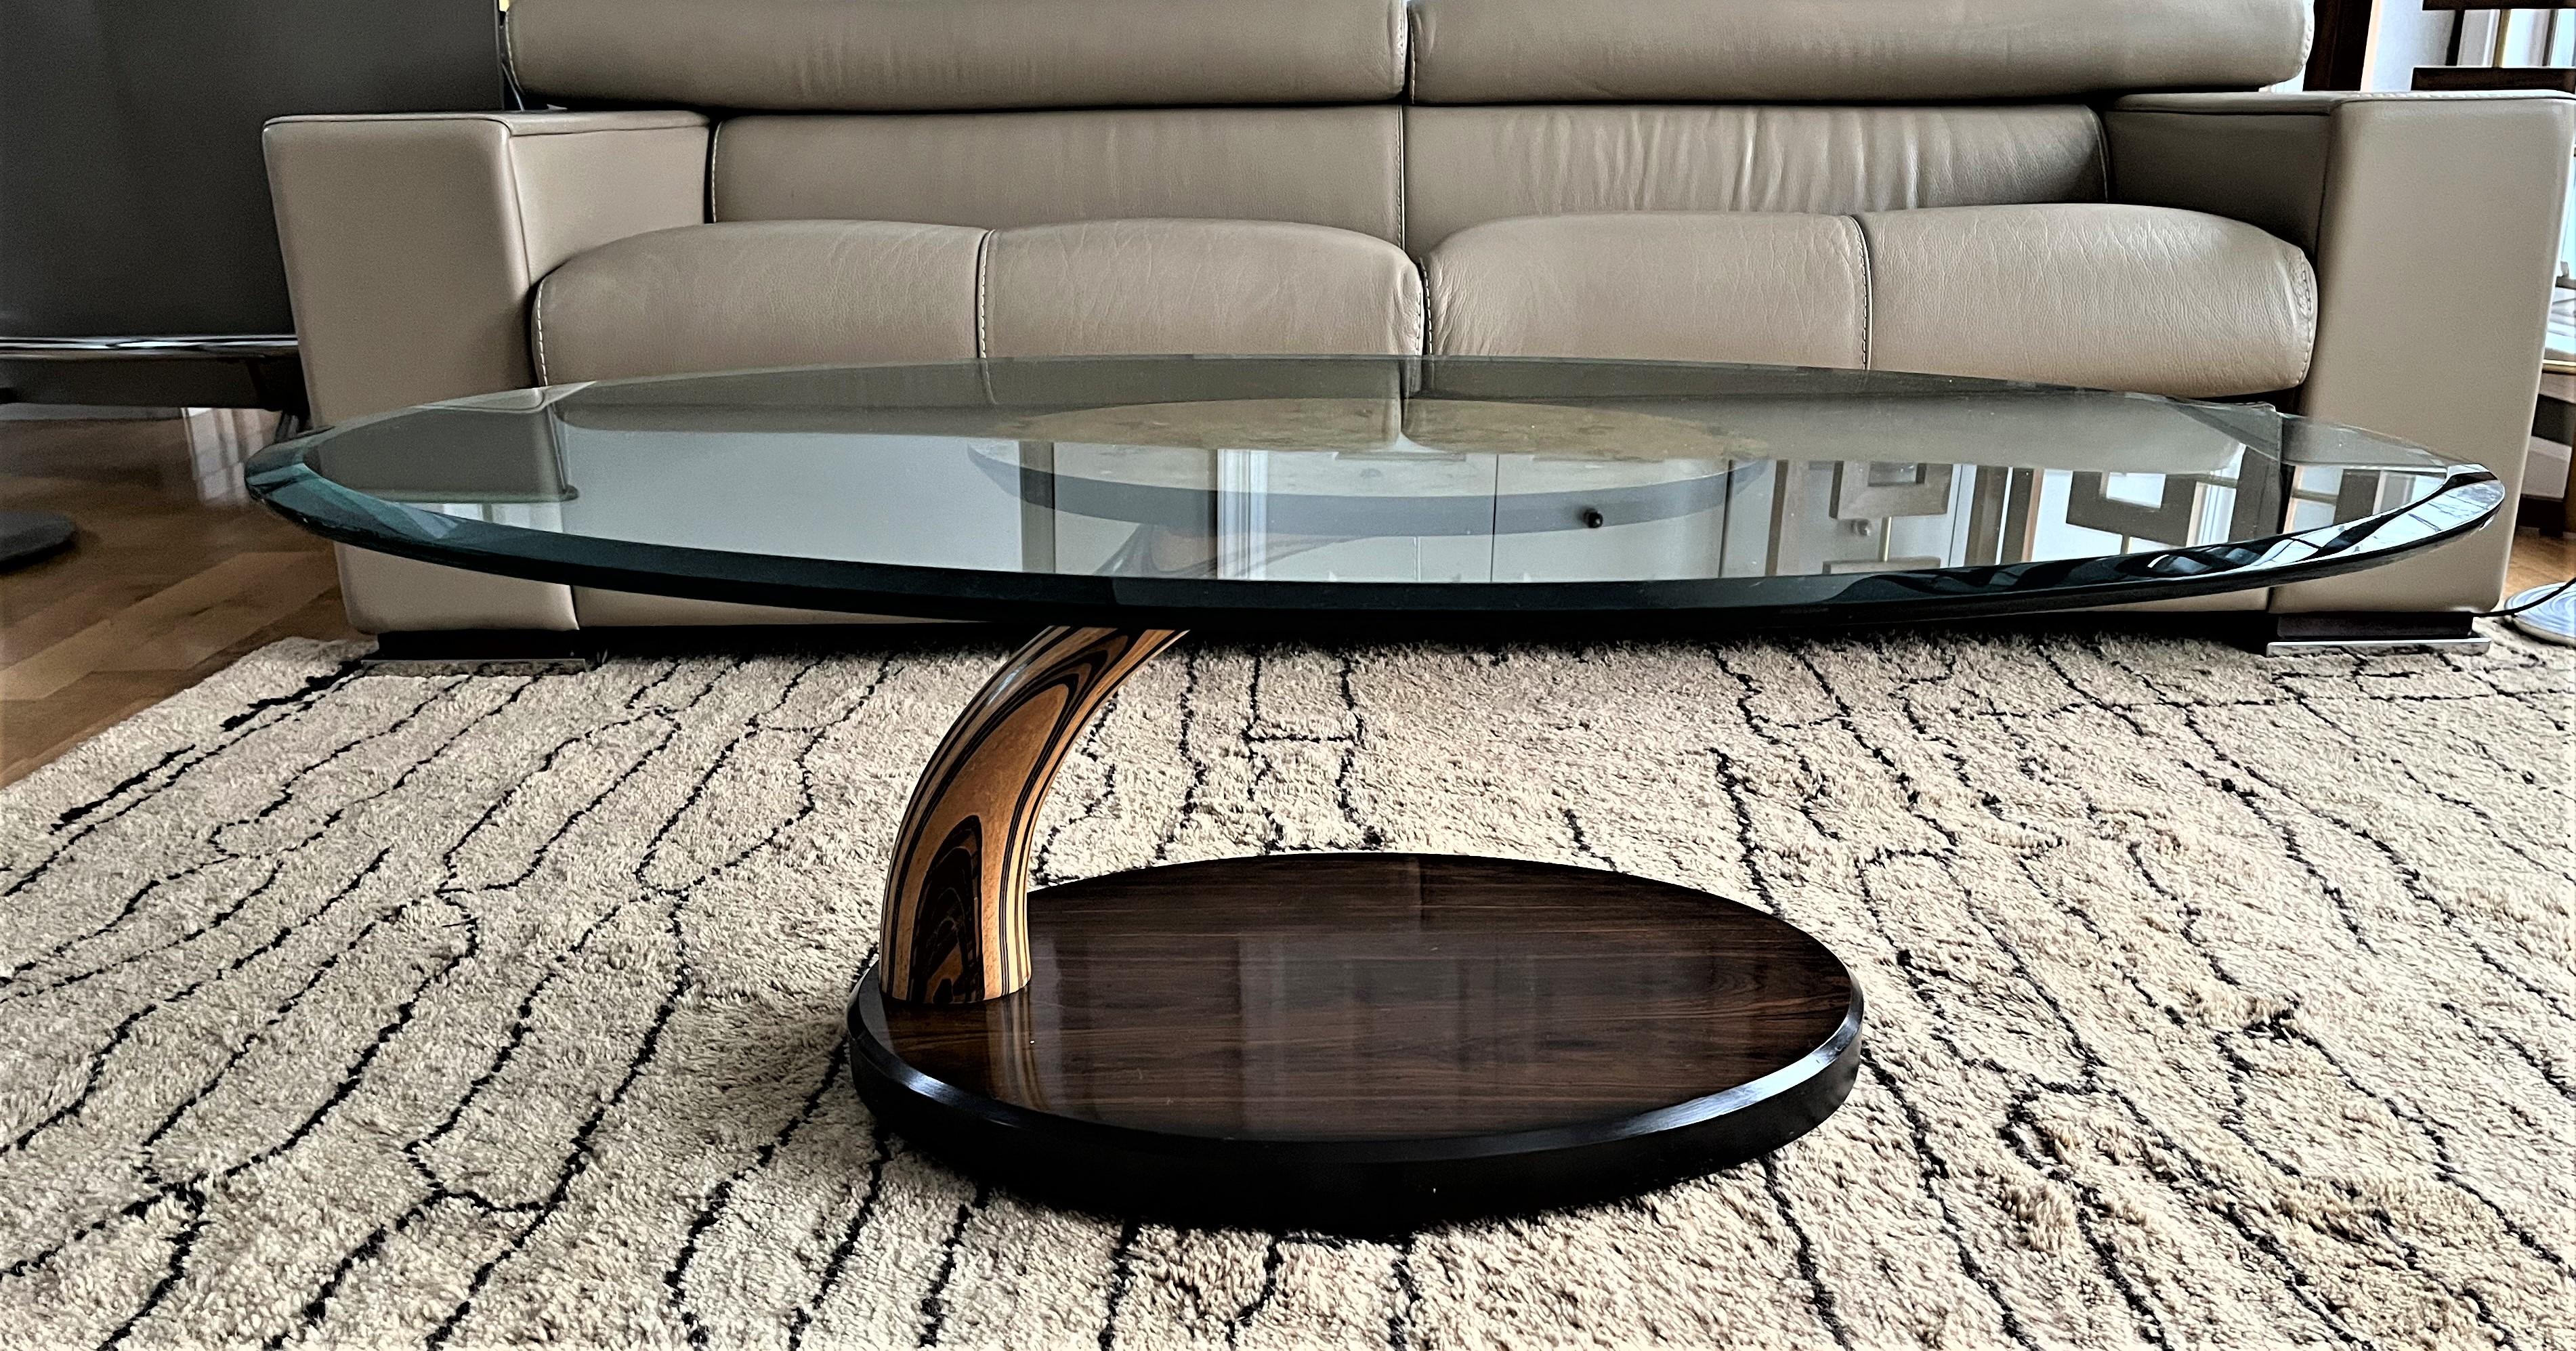 A 1970s Henredon Scene Two Coffee Table - various rare woods and glass top in good condition.